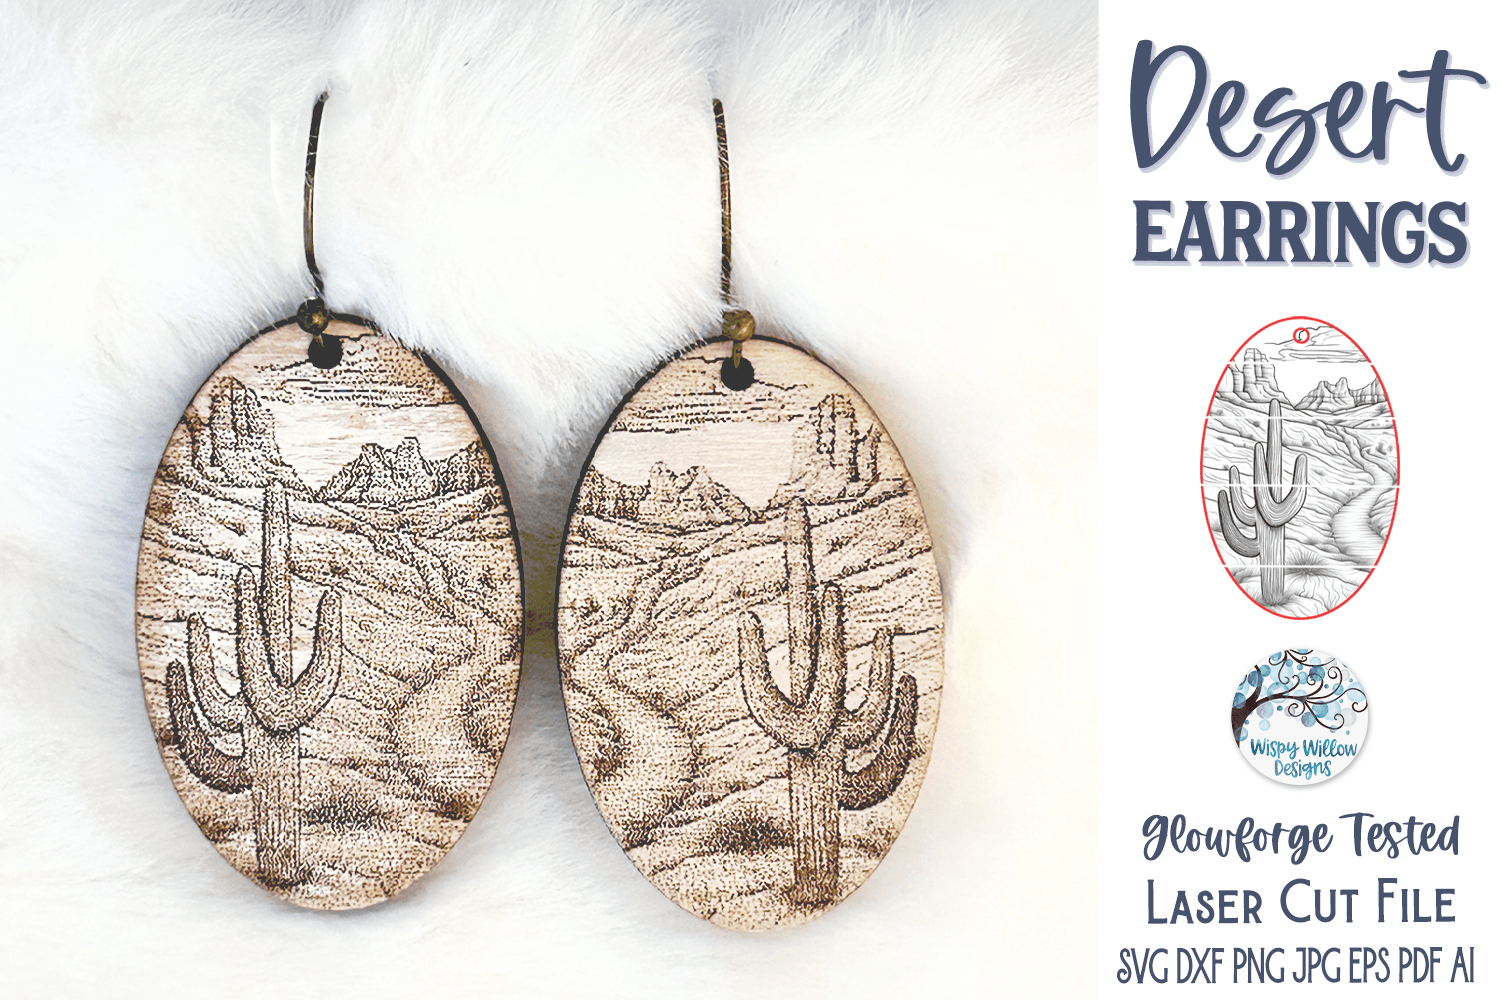 Desert Earring File for Glowforge or Laser Cutter Wispy Willow Designs Company